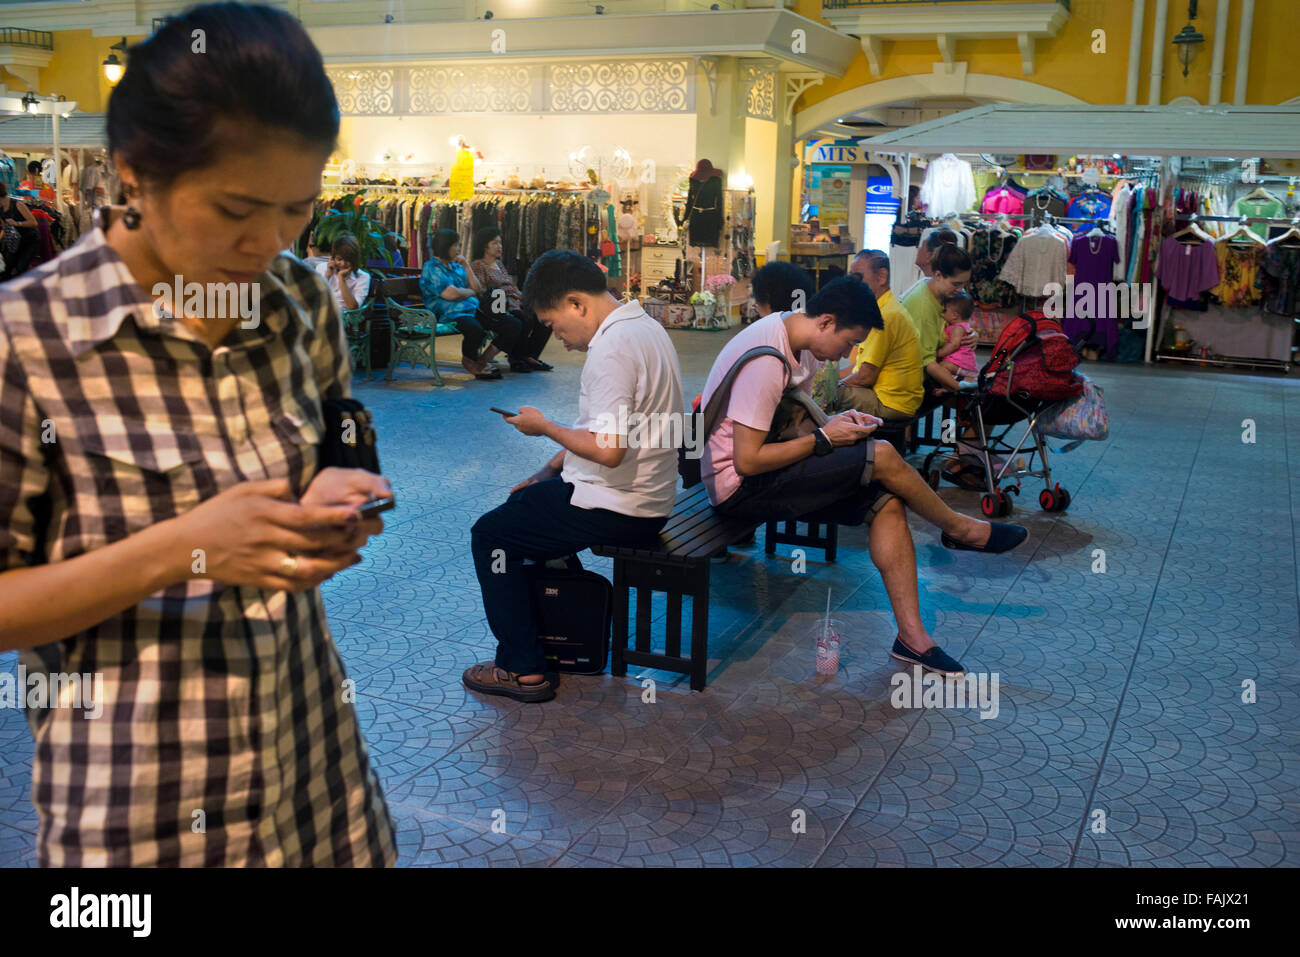 Everyone is connected to the mobile phone, Bangkok mall, Thailand. Stock Photo